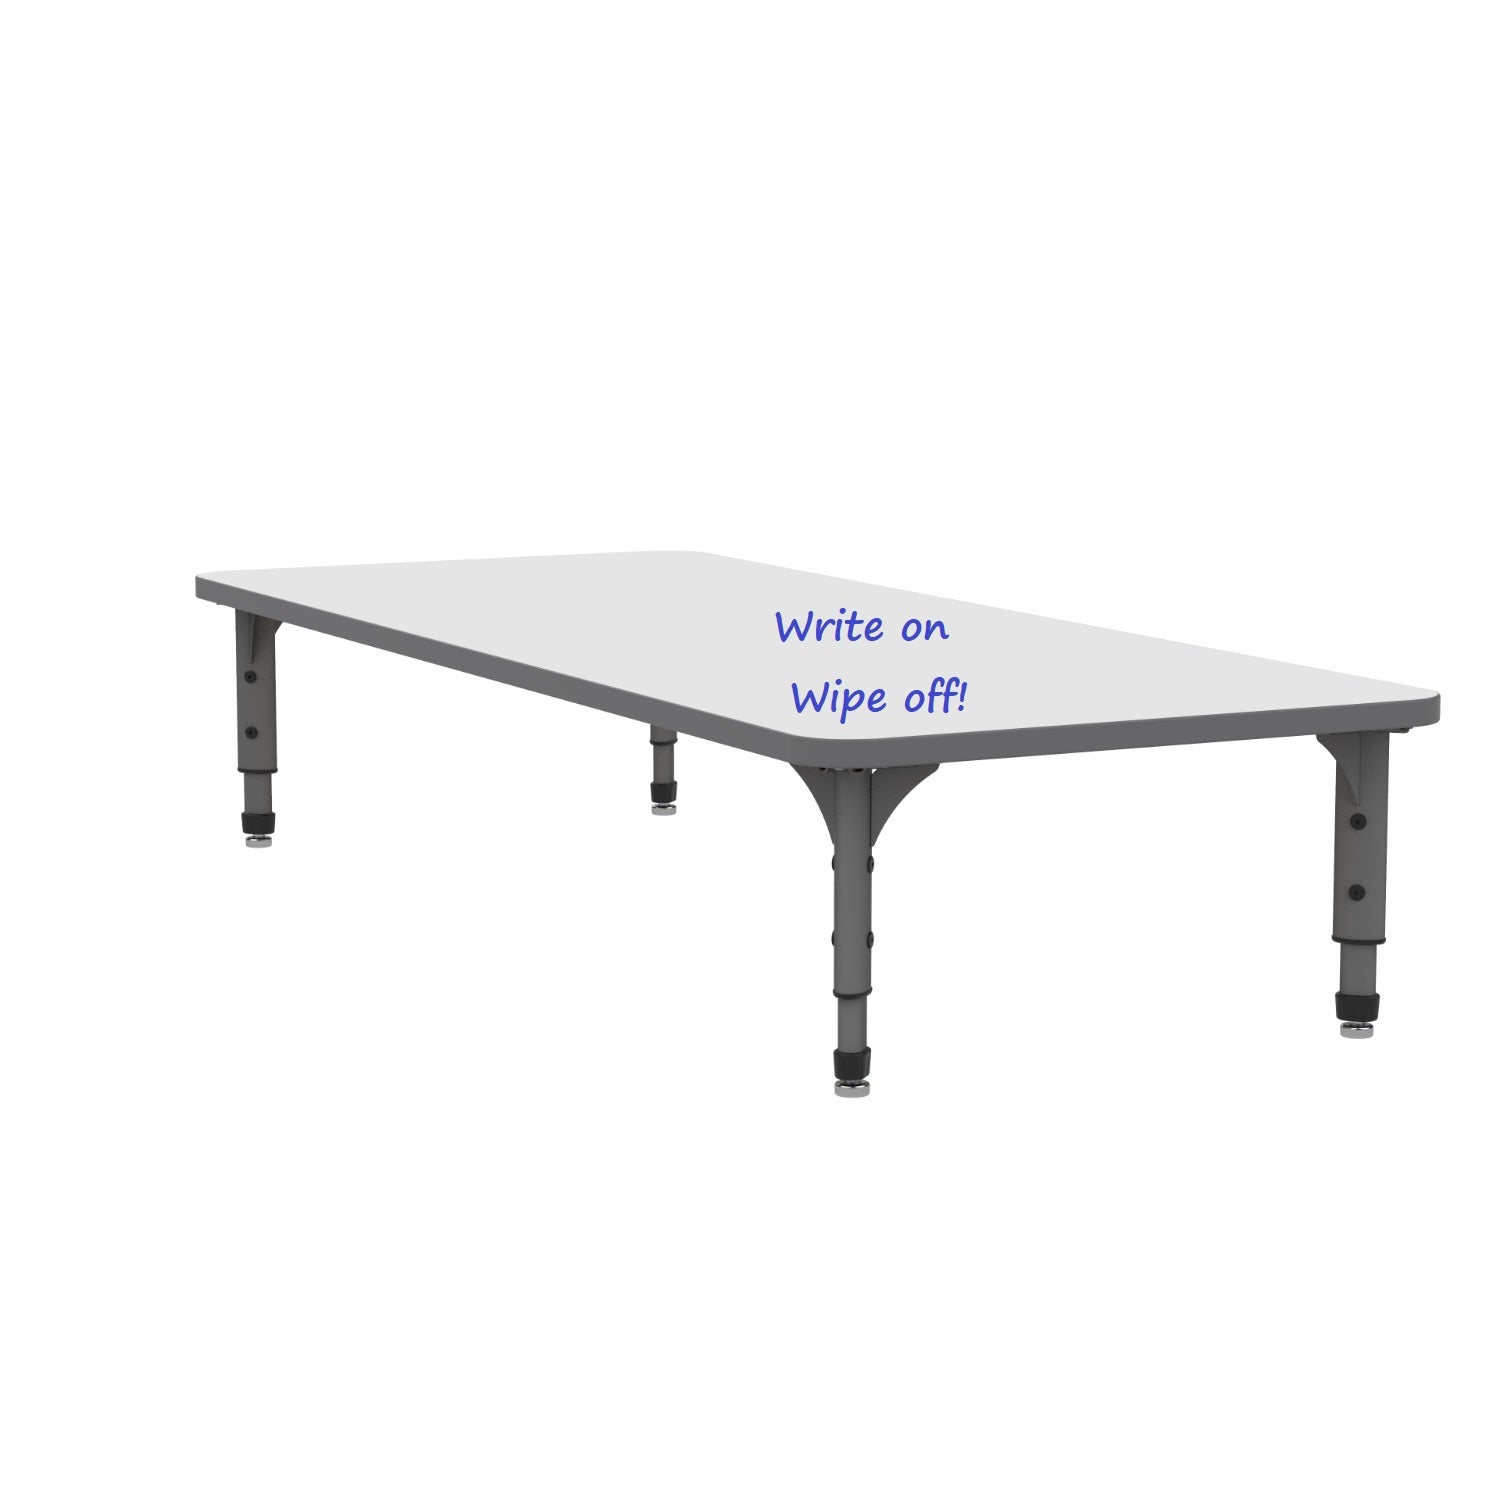 Adjustable Height Floor Activity Table with White Dry-Erase Markerboard Top, 30" x 72" Rectangle